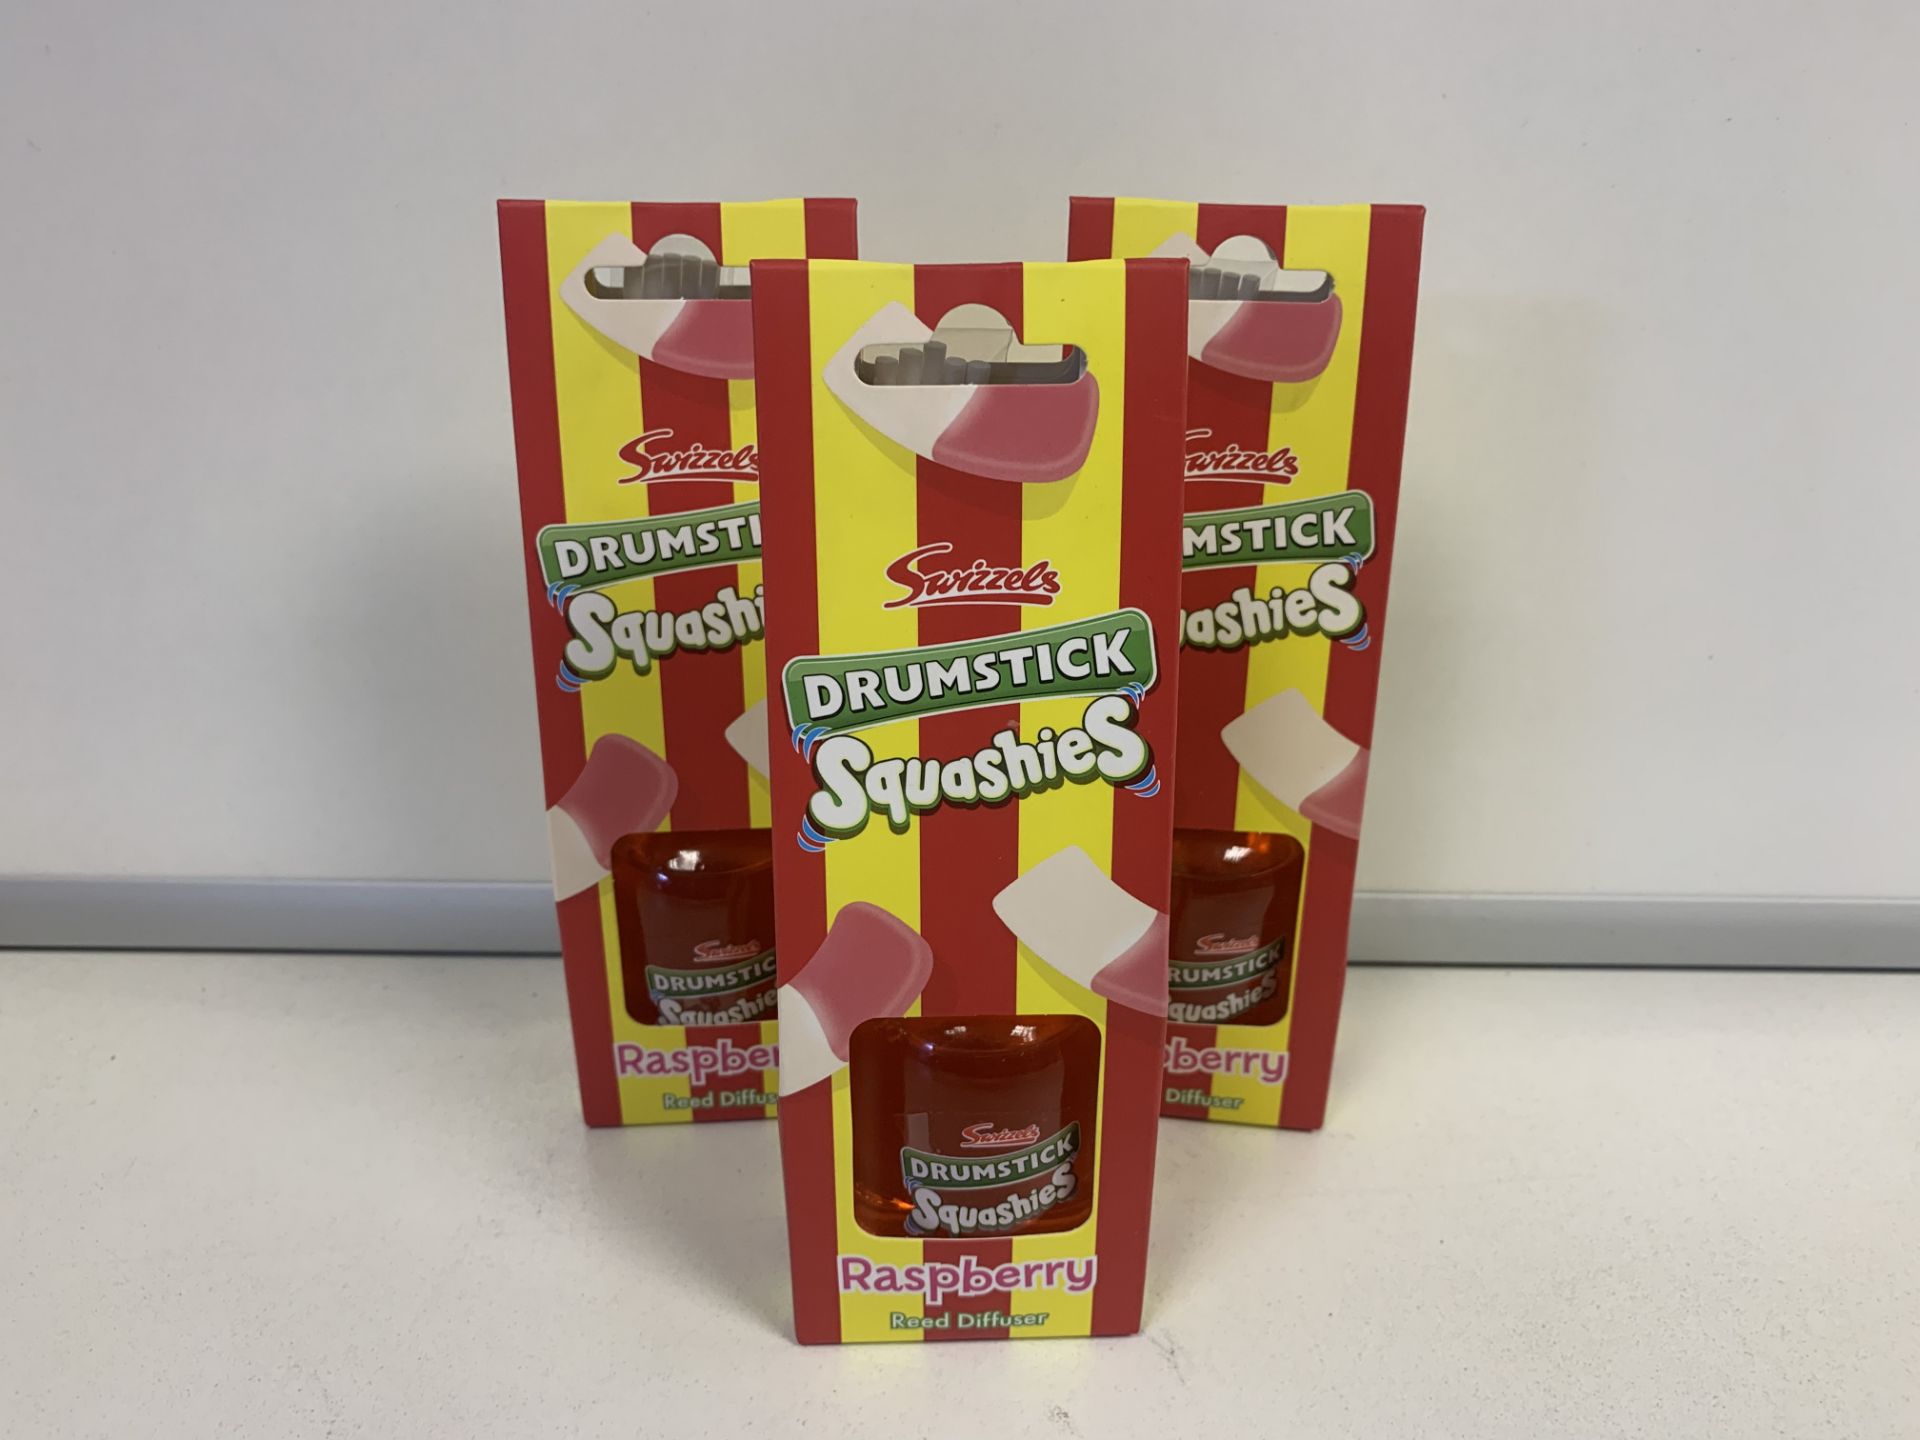 24 X BRAND NEW SWIZZELS DRUMSTICK SQUASHIES REED DIFUSERS - Image 2 of 2